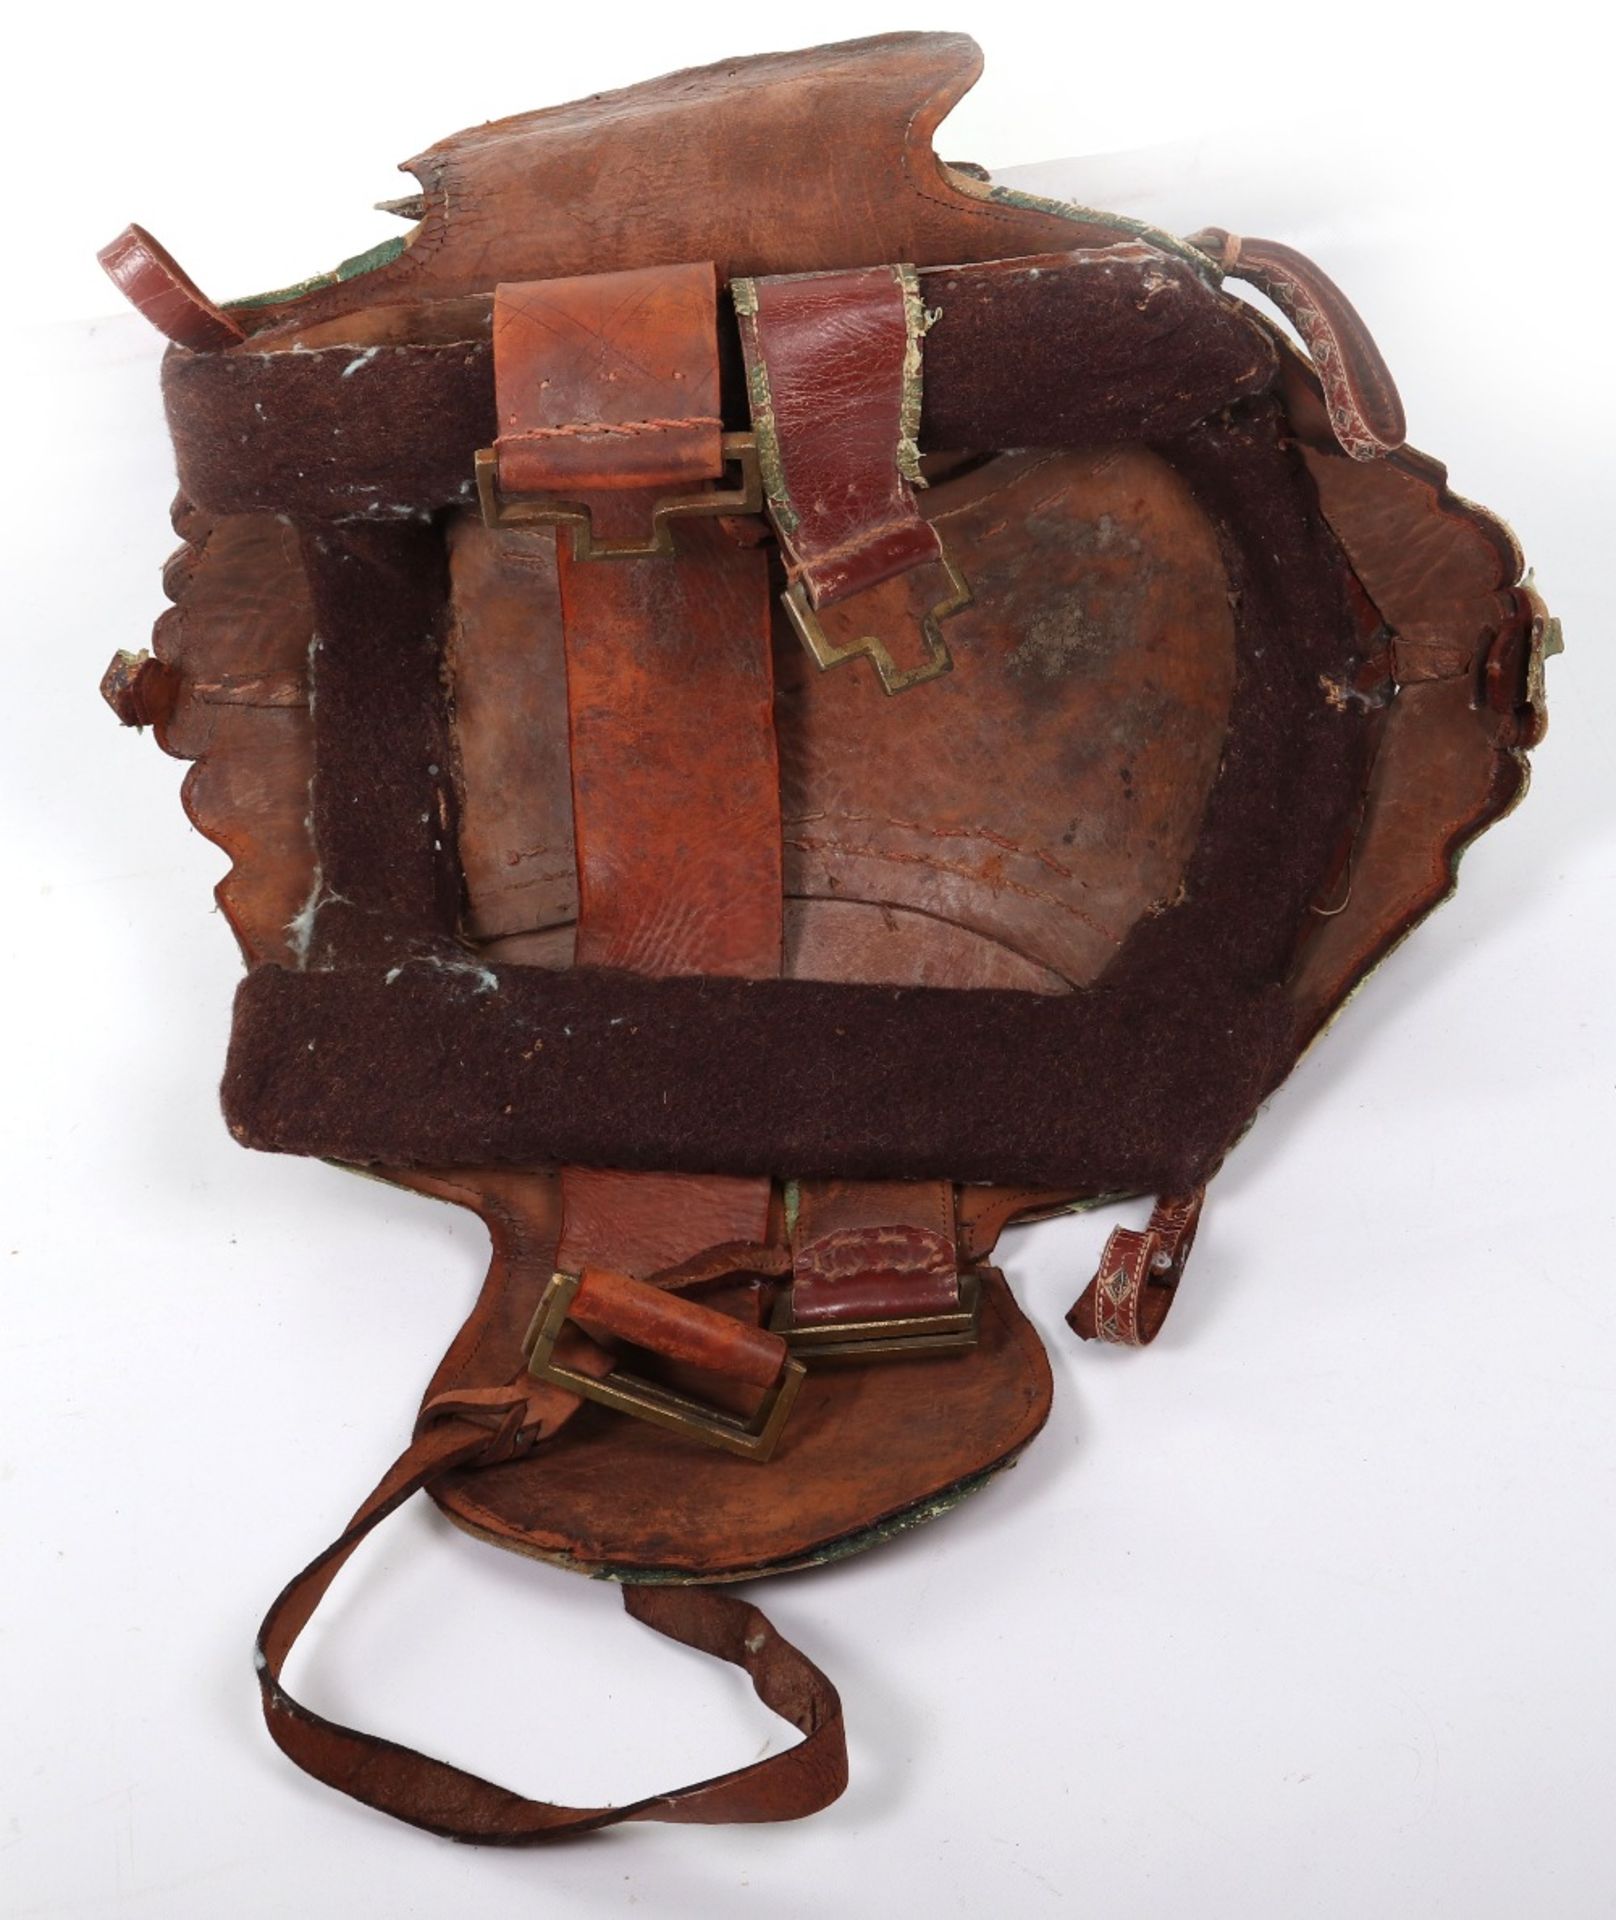 Fine and Scarce North Indian Saddle, Probably Late 19th or Early 20th Century - Image 12 of 12